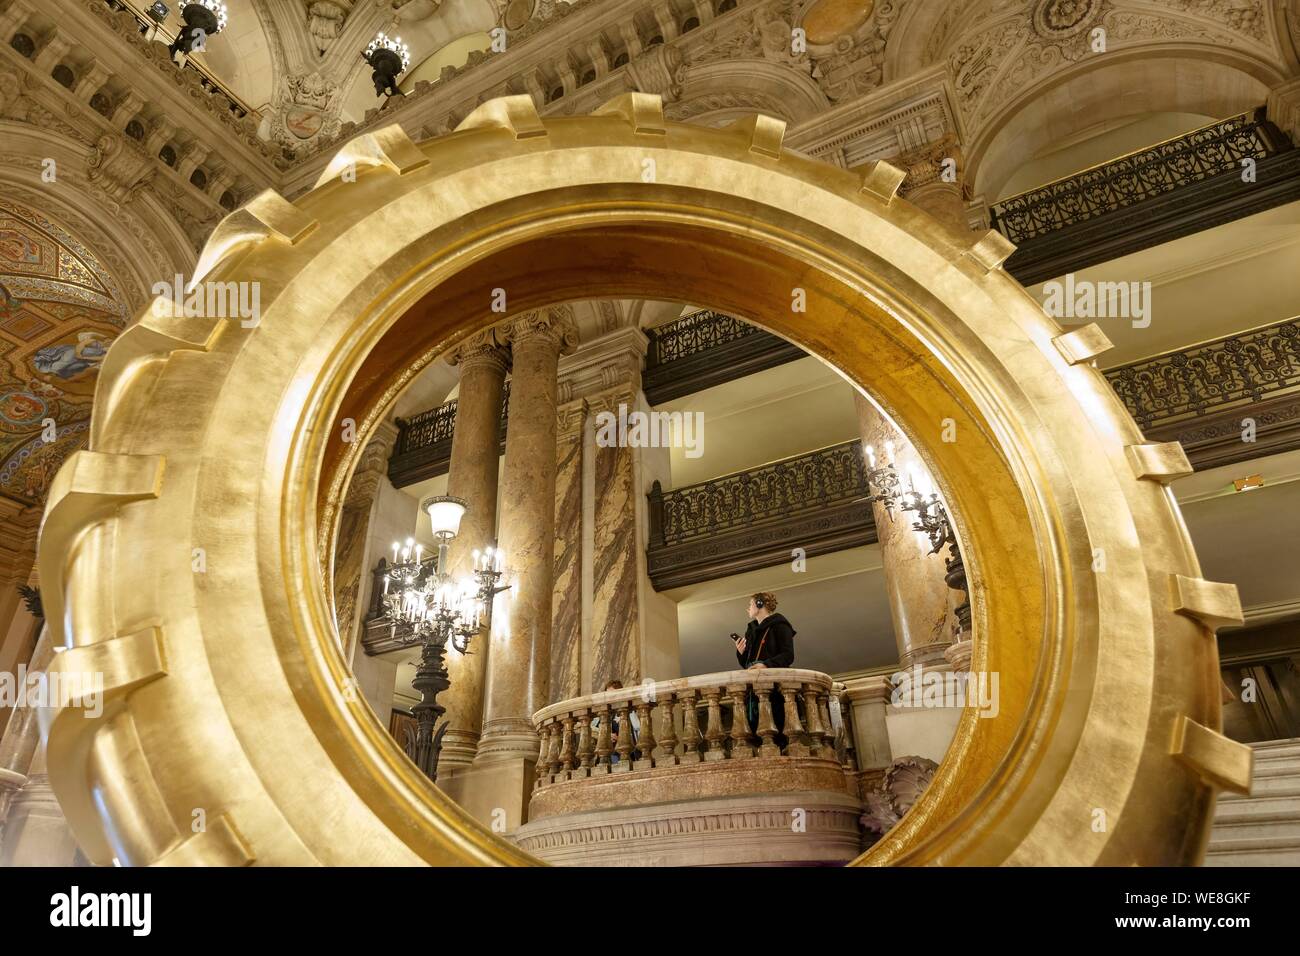 France, Paris, Garnier opera house (1878) under the architect Charles Garnier in eclectic style, sculpture on the Grand staircase Stock Photo